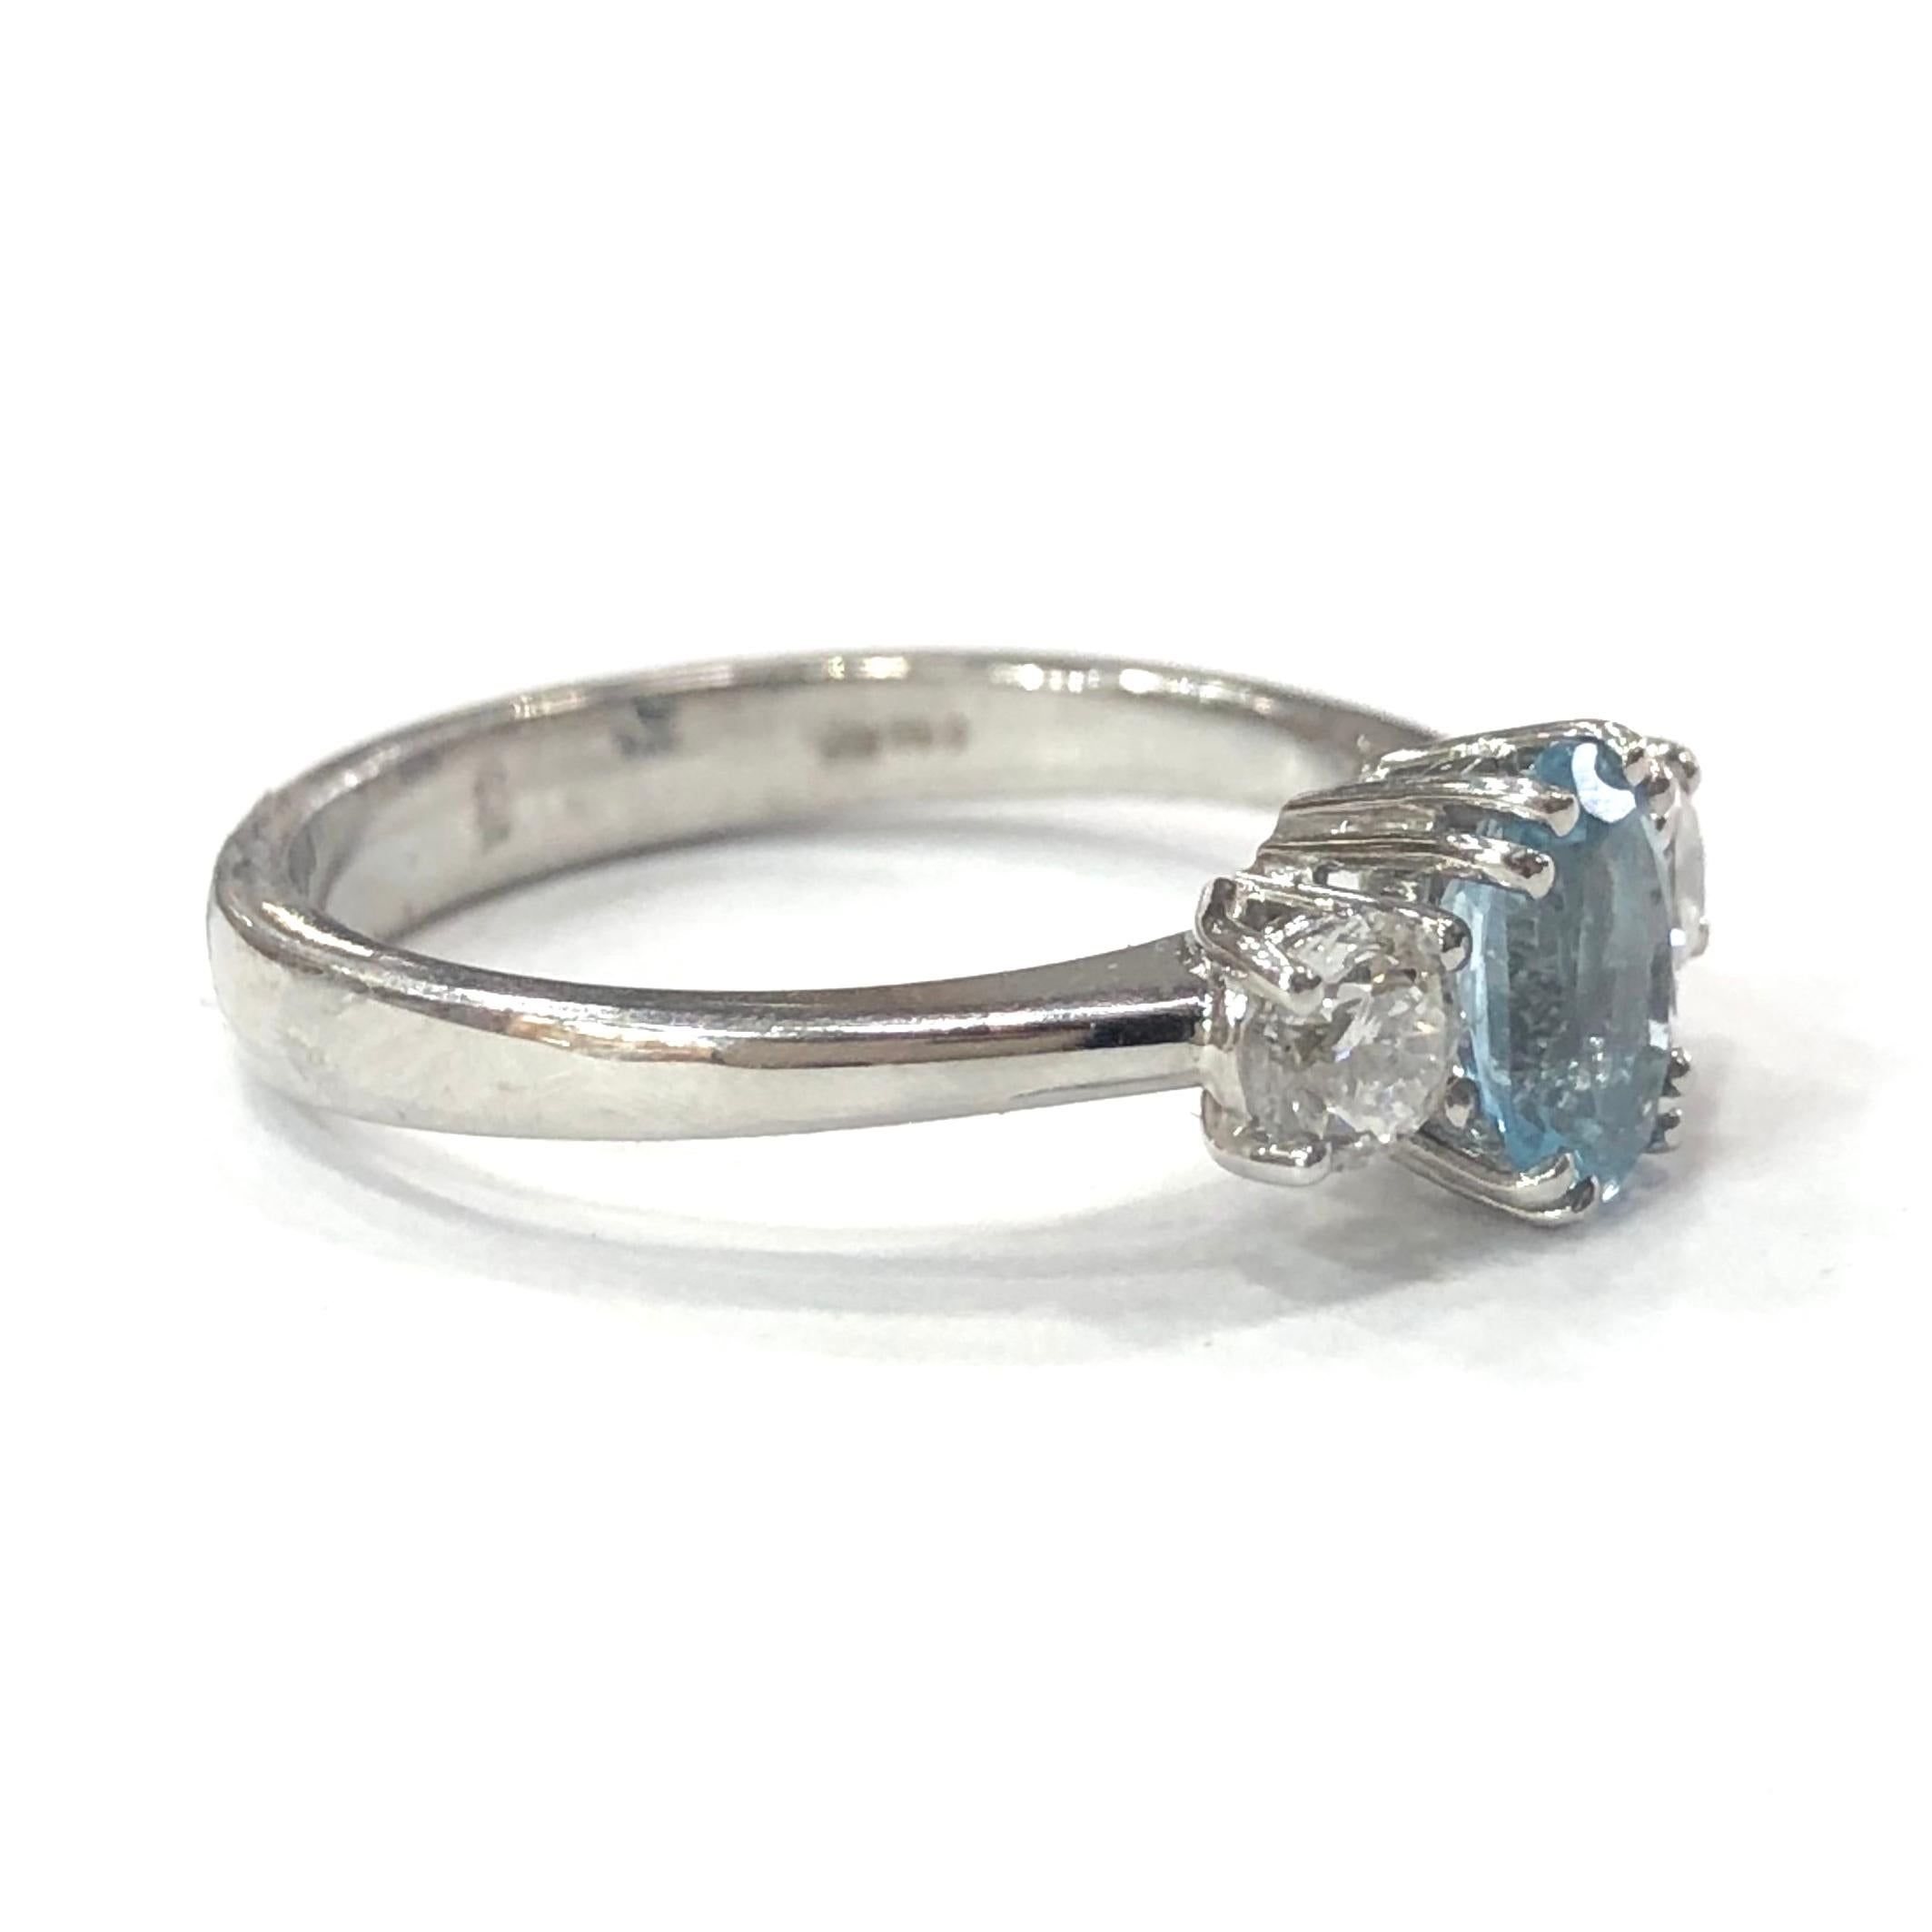 18ct White Gold Aquamarine and Diamond Three Stone Ring. Set with one central oval Aquamarine, with two round brilliant cut Diamonds either side.
With a full english hallmark.

Approximate Aquamarine weight : 0.71ct
Approximate total Diamond weight